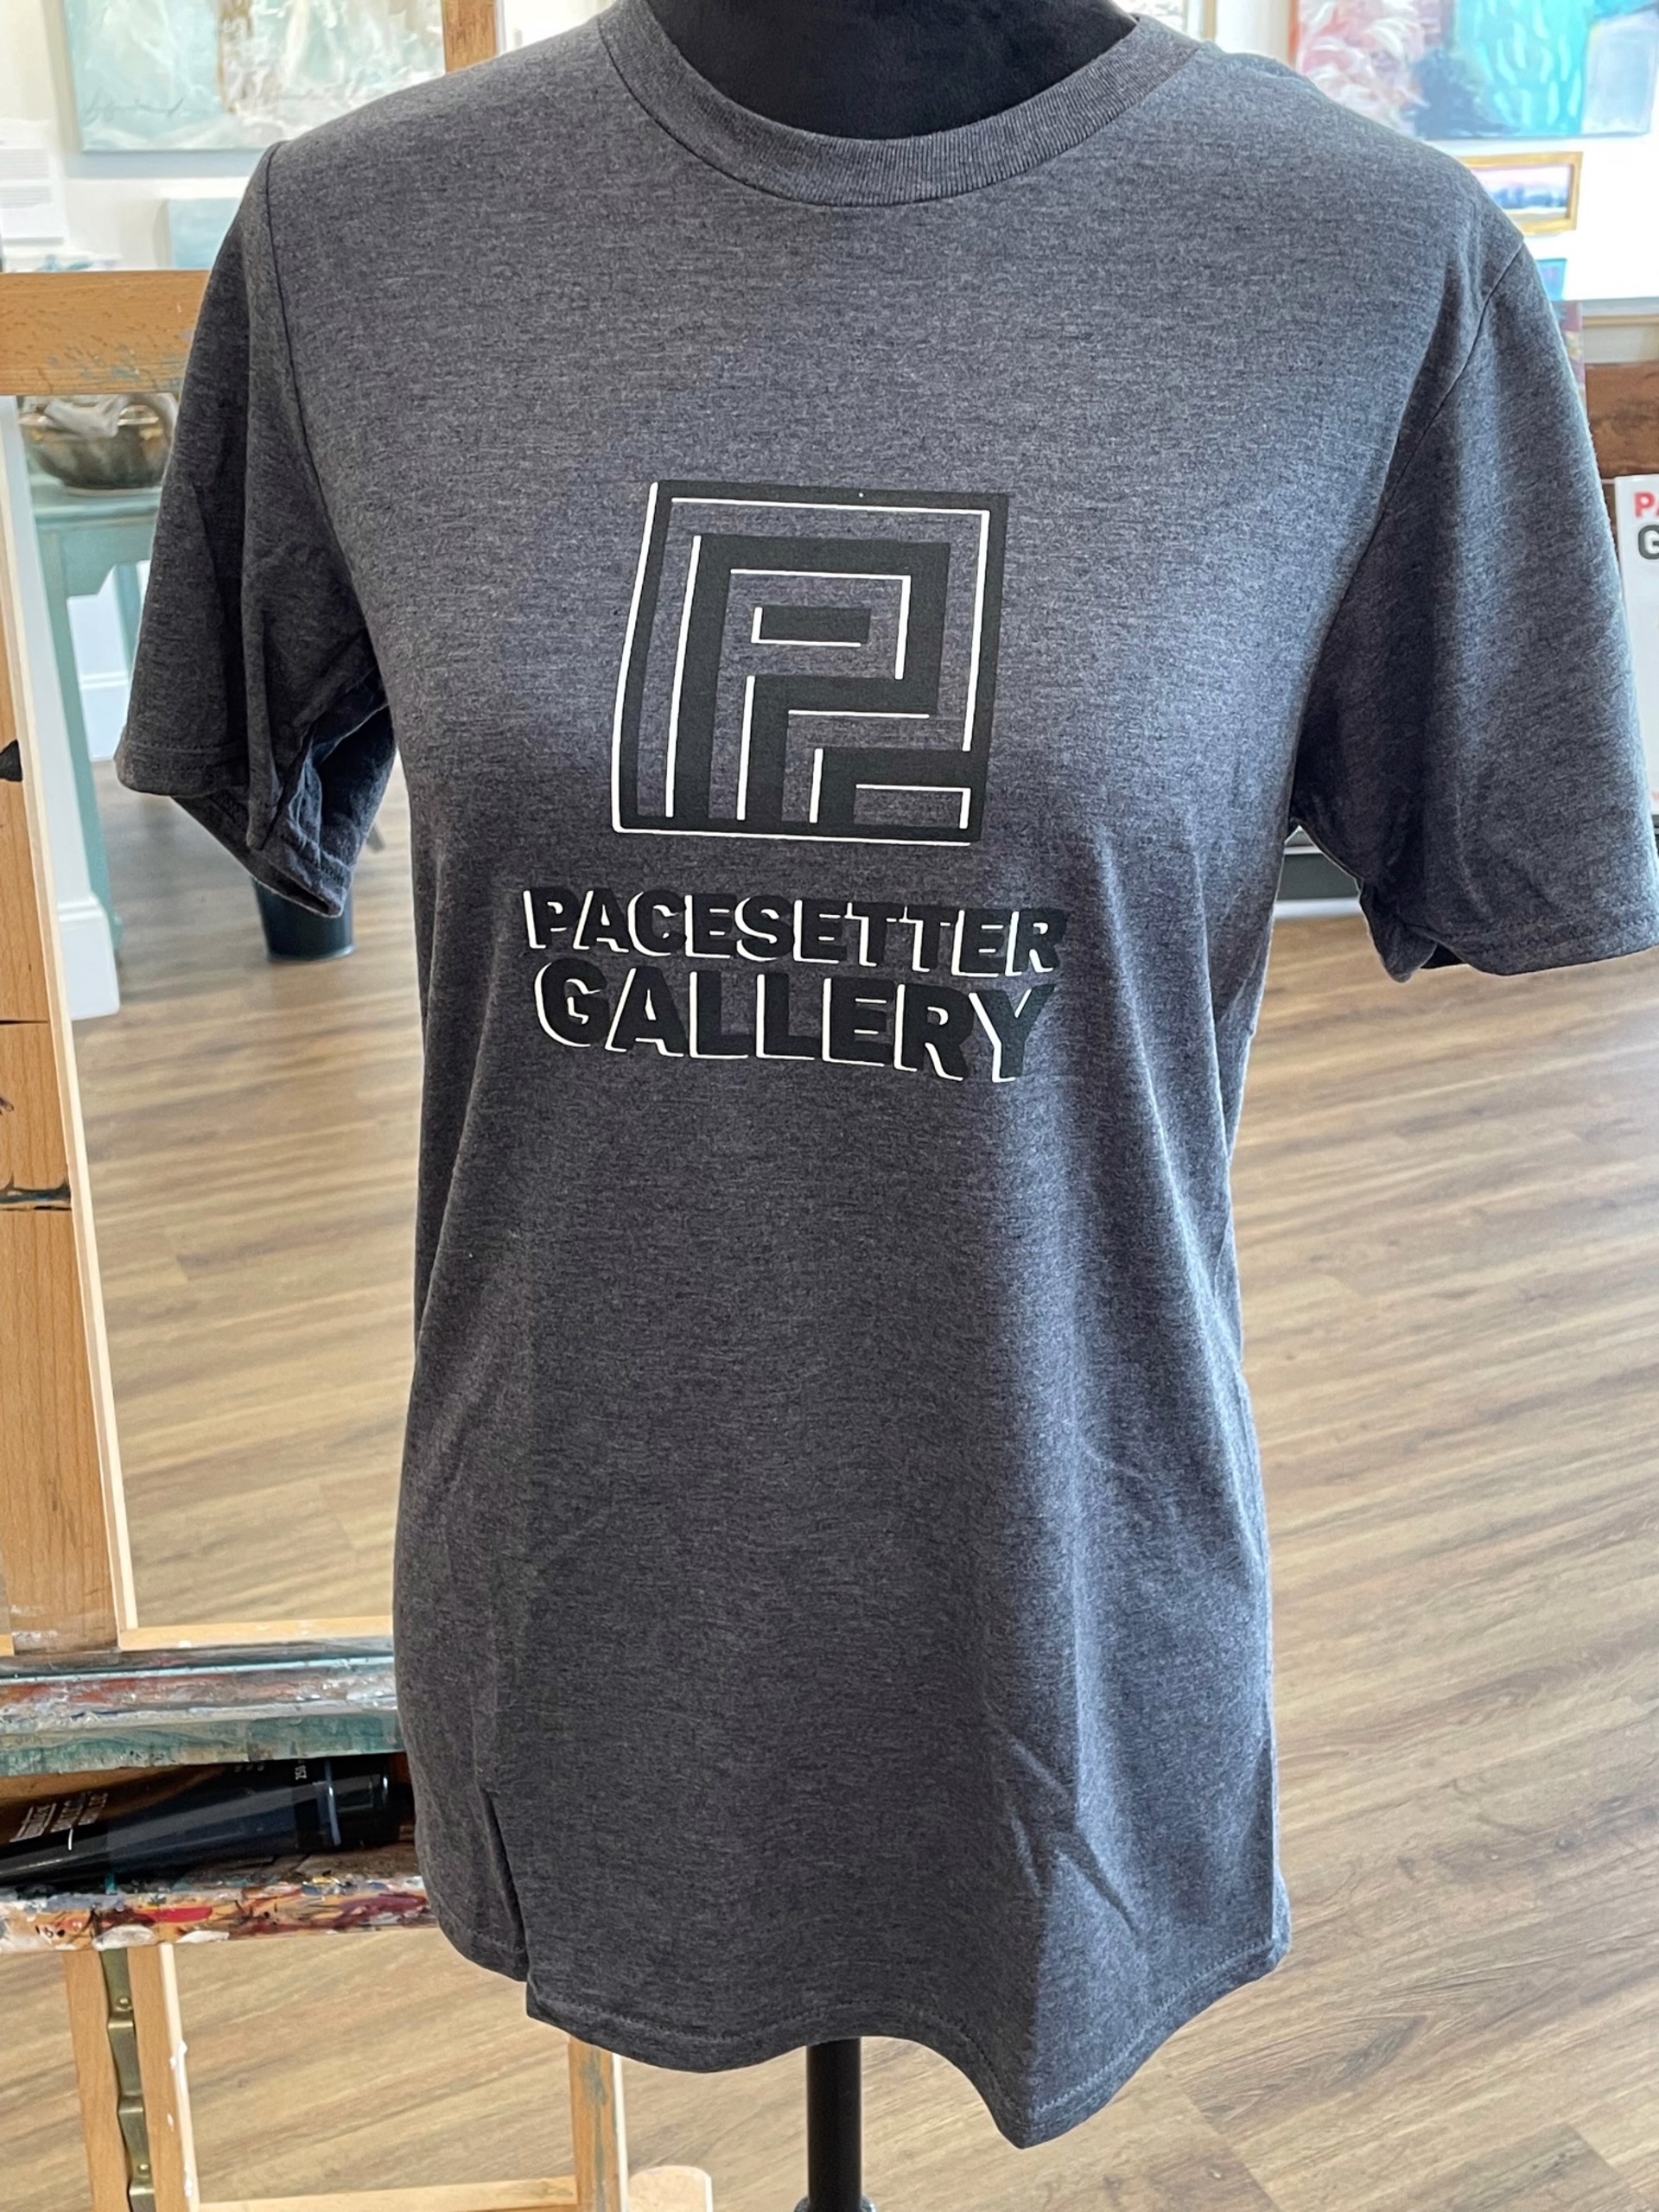 Pacesetter Gallery Unisex T-Shirt (2XL) by Pacesetter Merchandise